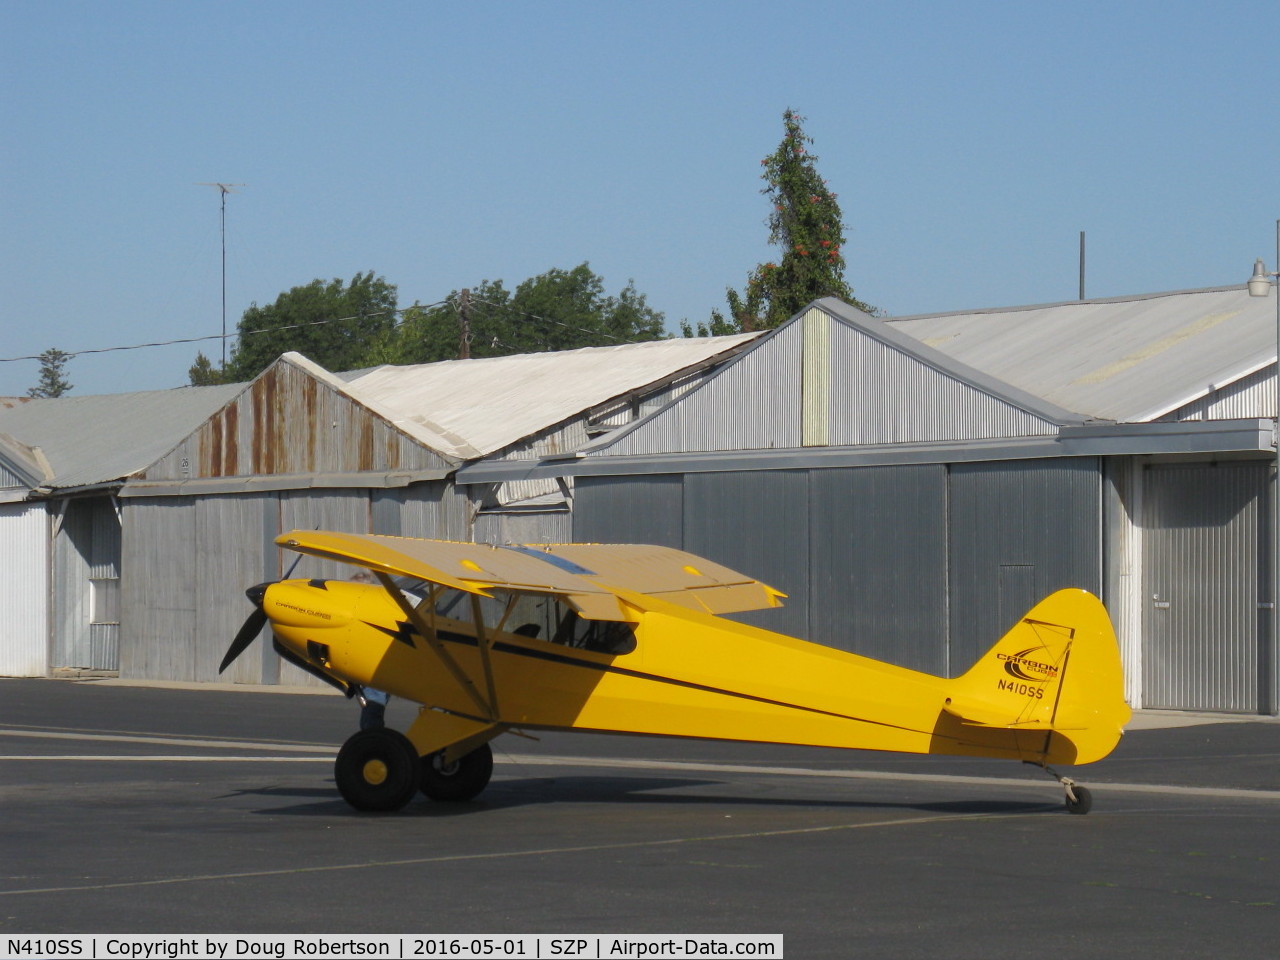 N410SS, 2013 Cub Crafters CC11-160 Carbon Cub SS C/N CC11-00292, 2013 CubCrafters CC11-160 CARBON CUB SS, S-LSA, CubCrafters CC340 rated 180 hp for 5 minutes, 80 Hp continuous, taxi to Fuel dock